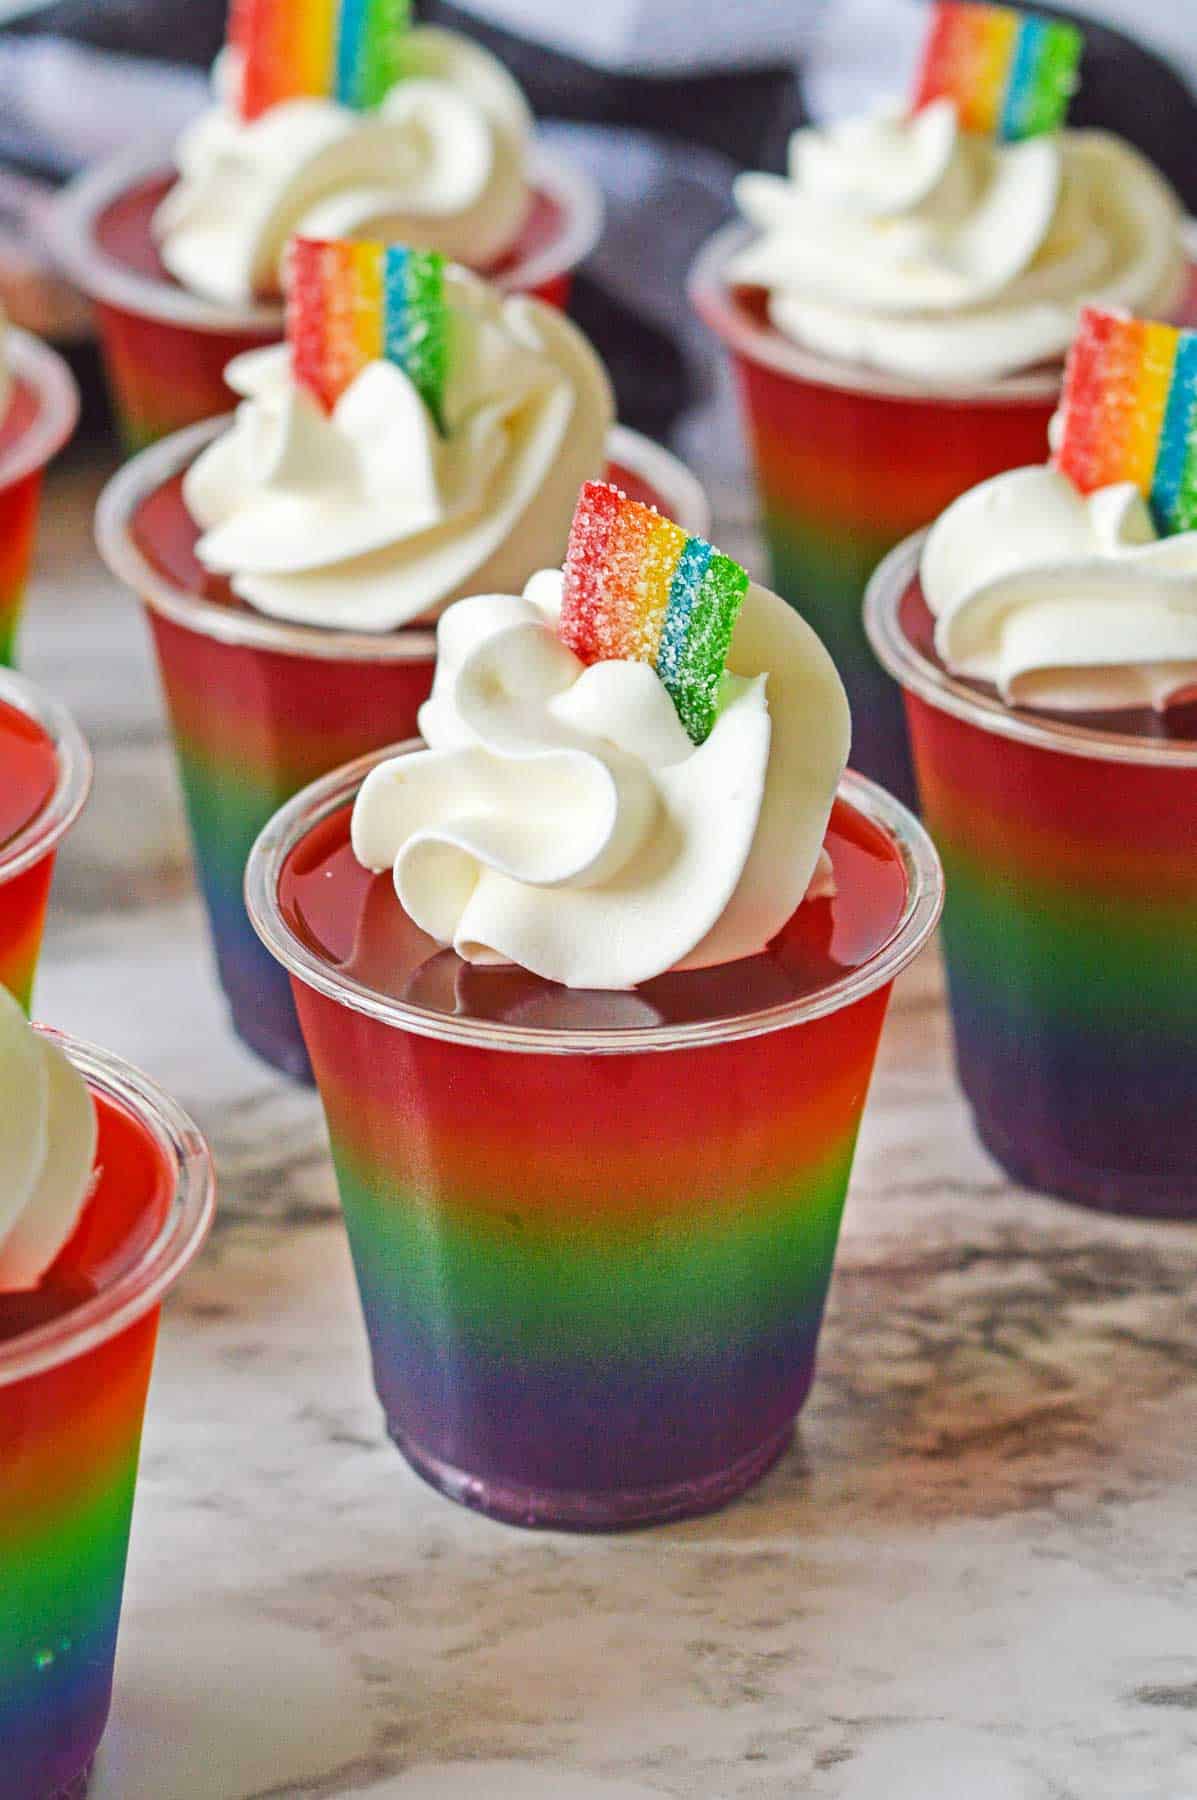 Several rainbow jello shots topped with cool whip and small airhead xtreme pieces.